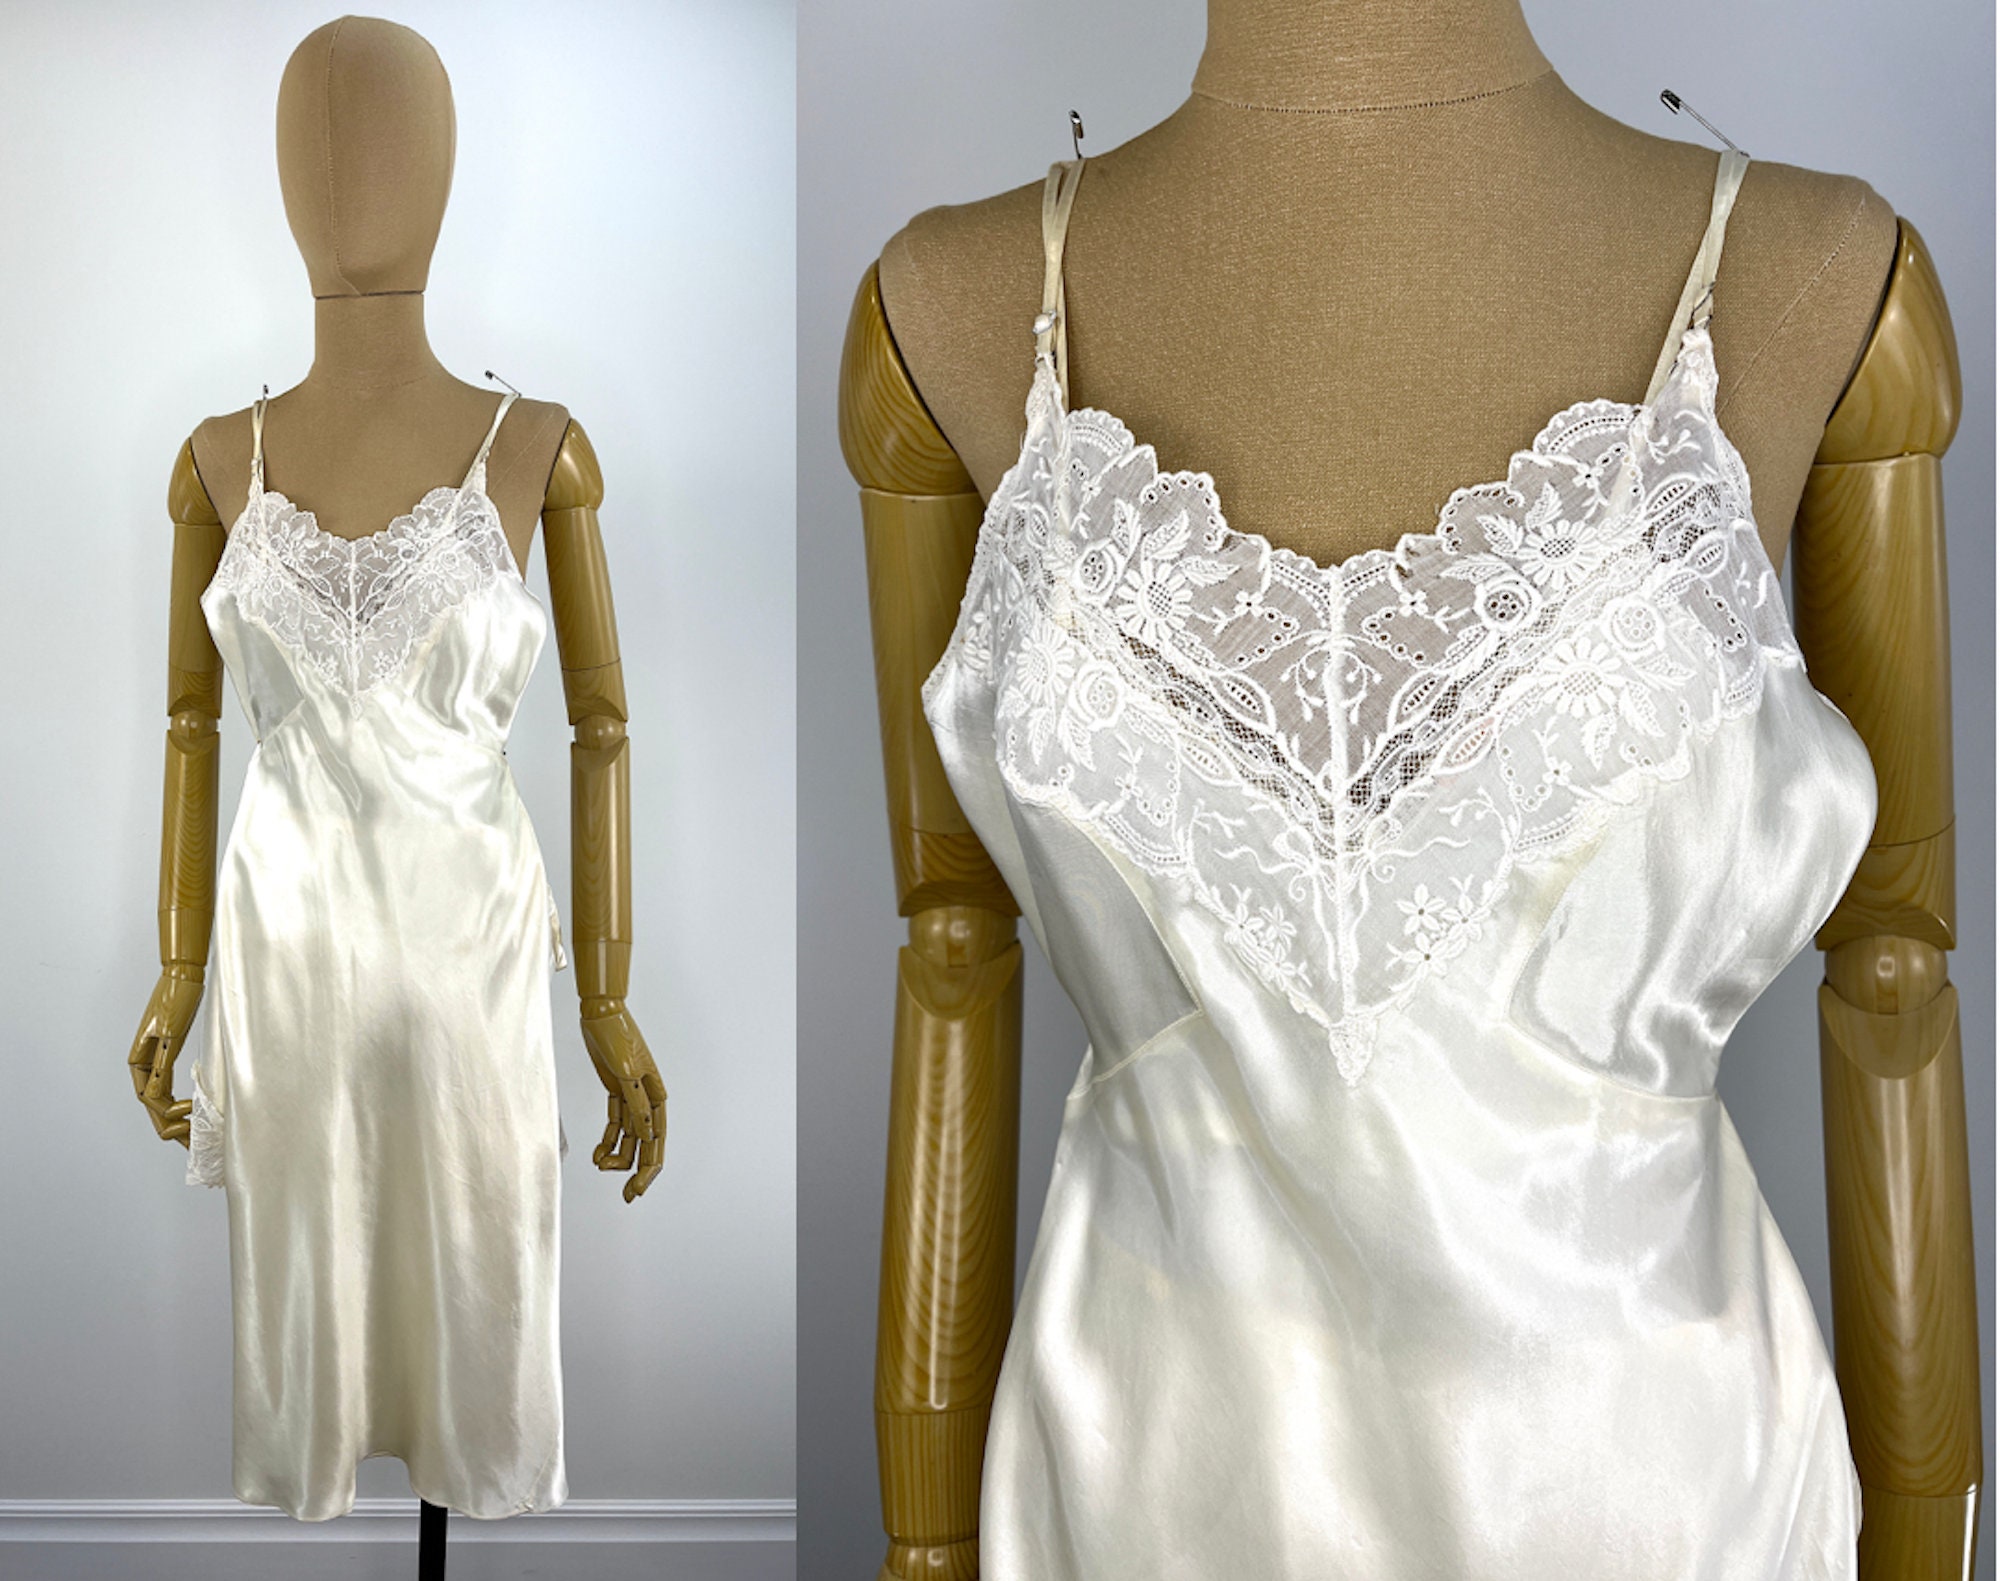 Vintage 1940s/1950s White Silk and Lace Slip Set With Dress Slip and Shorts.  Vintage Lingerie Set of Slip and Bloomers -  Sweden